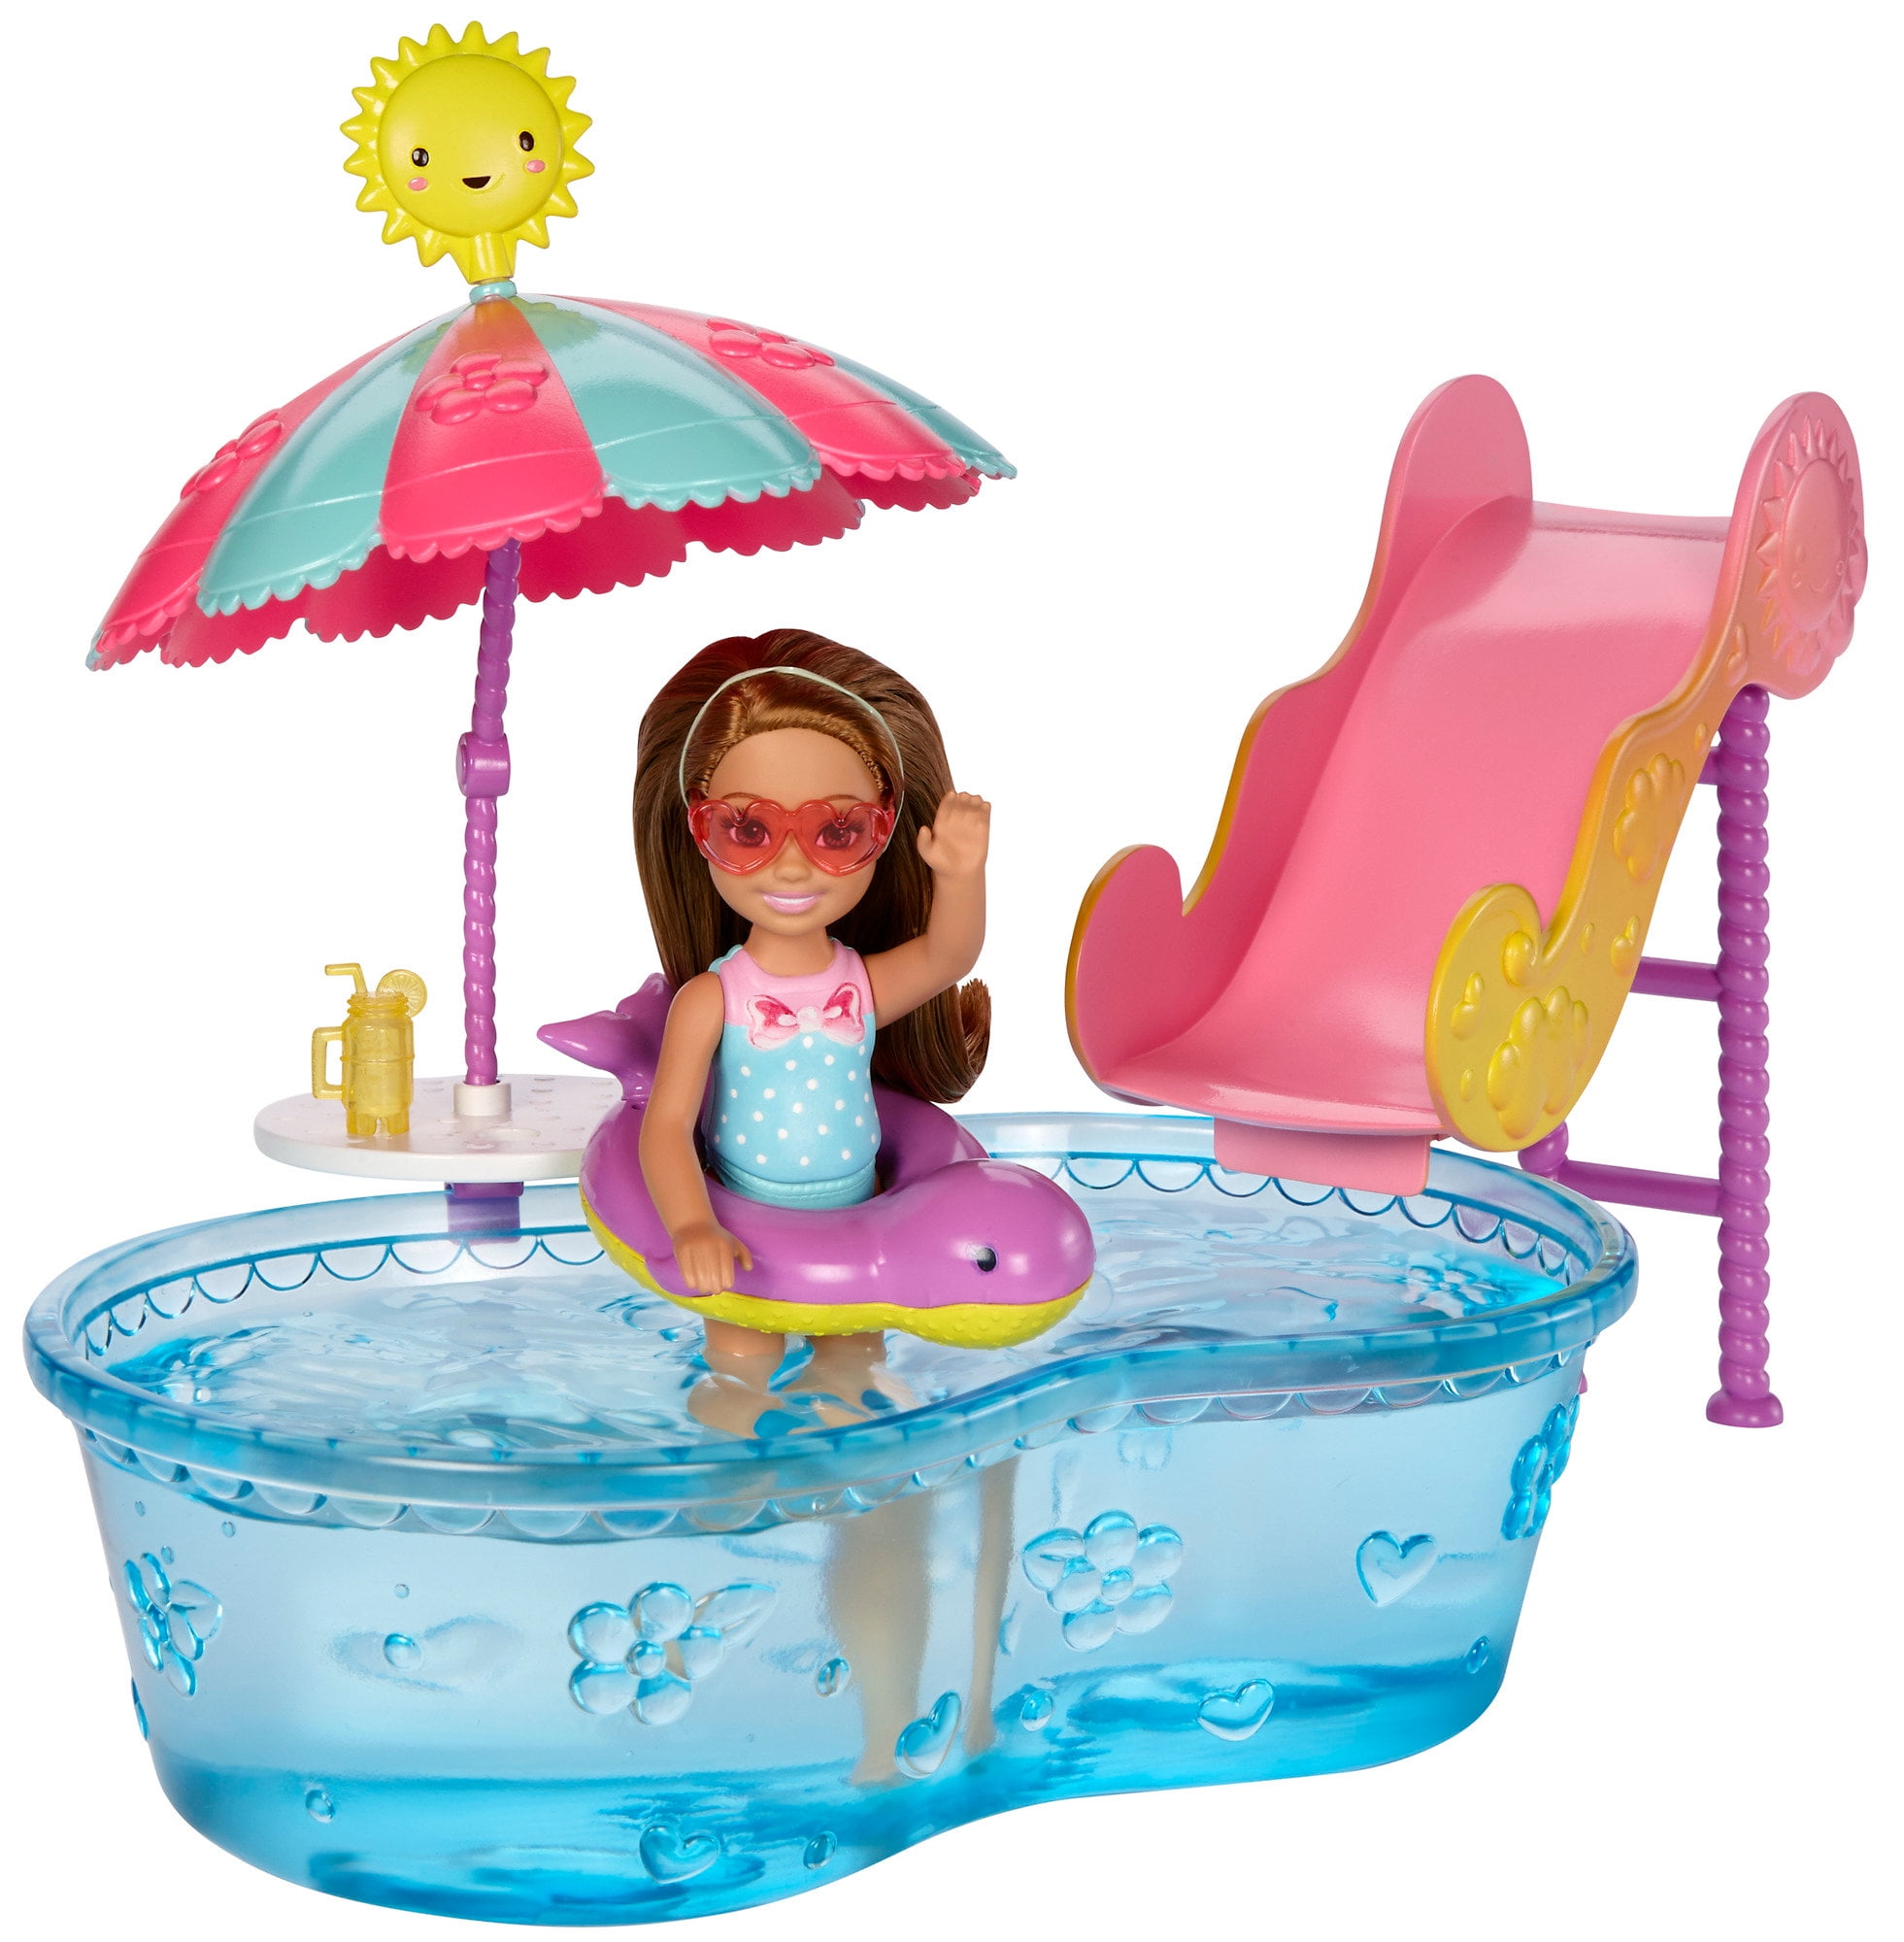 Barbie Glam Pool Fun doll activity Child Kids waterslide chair smoothies Toys 2 